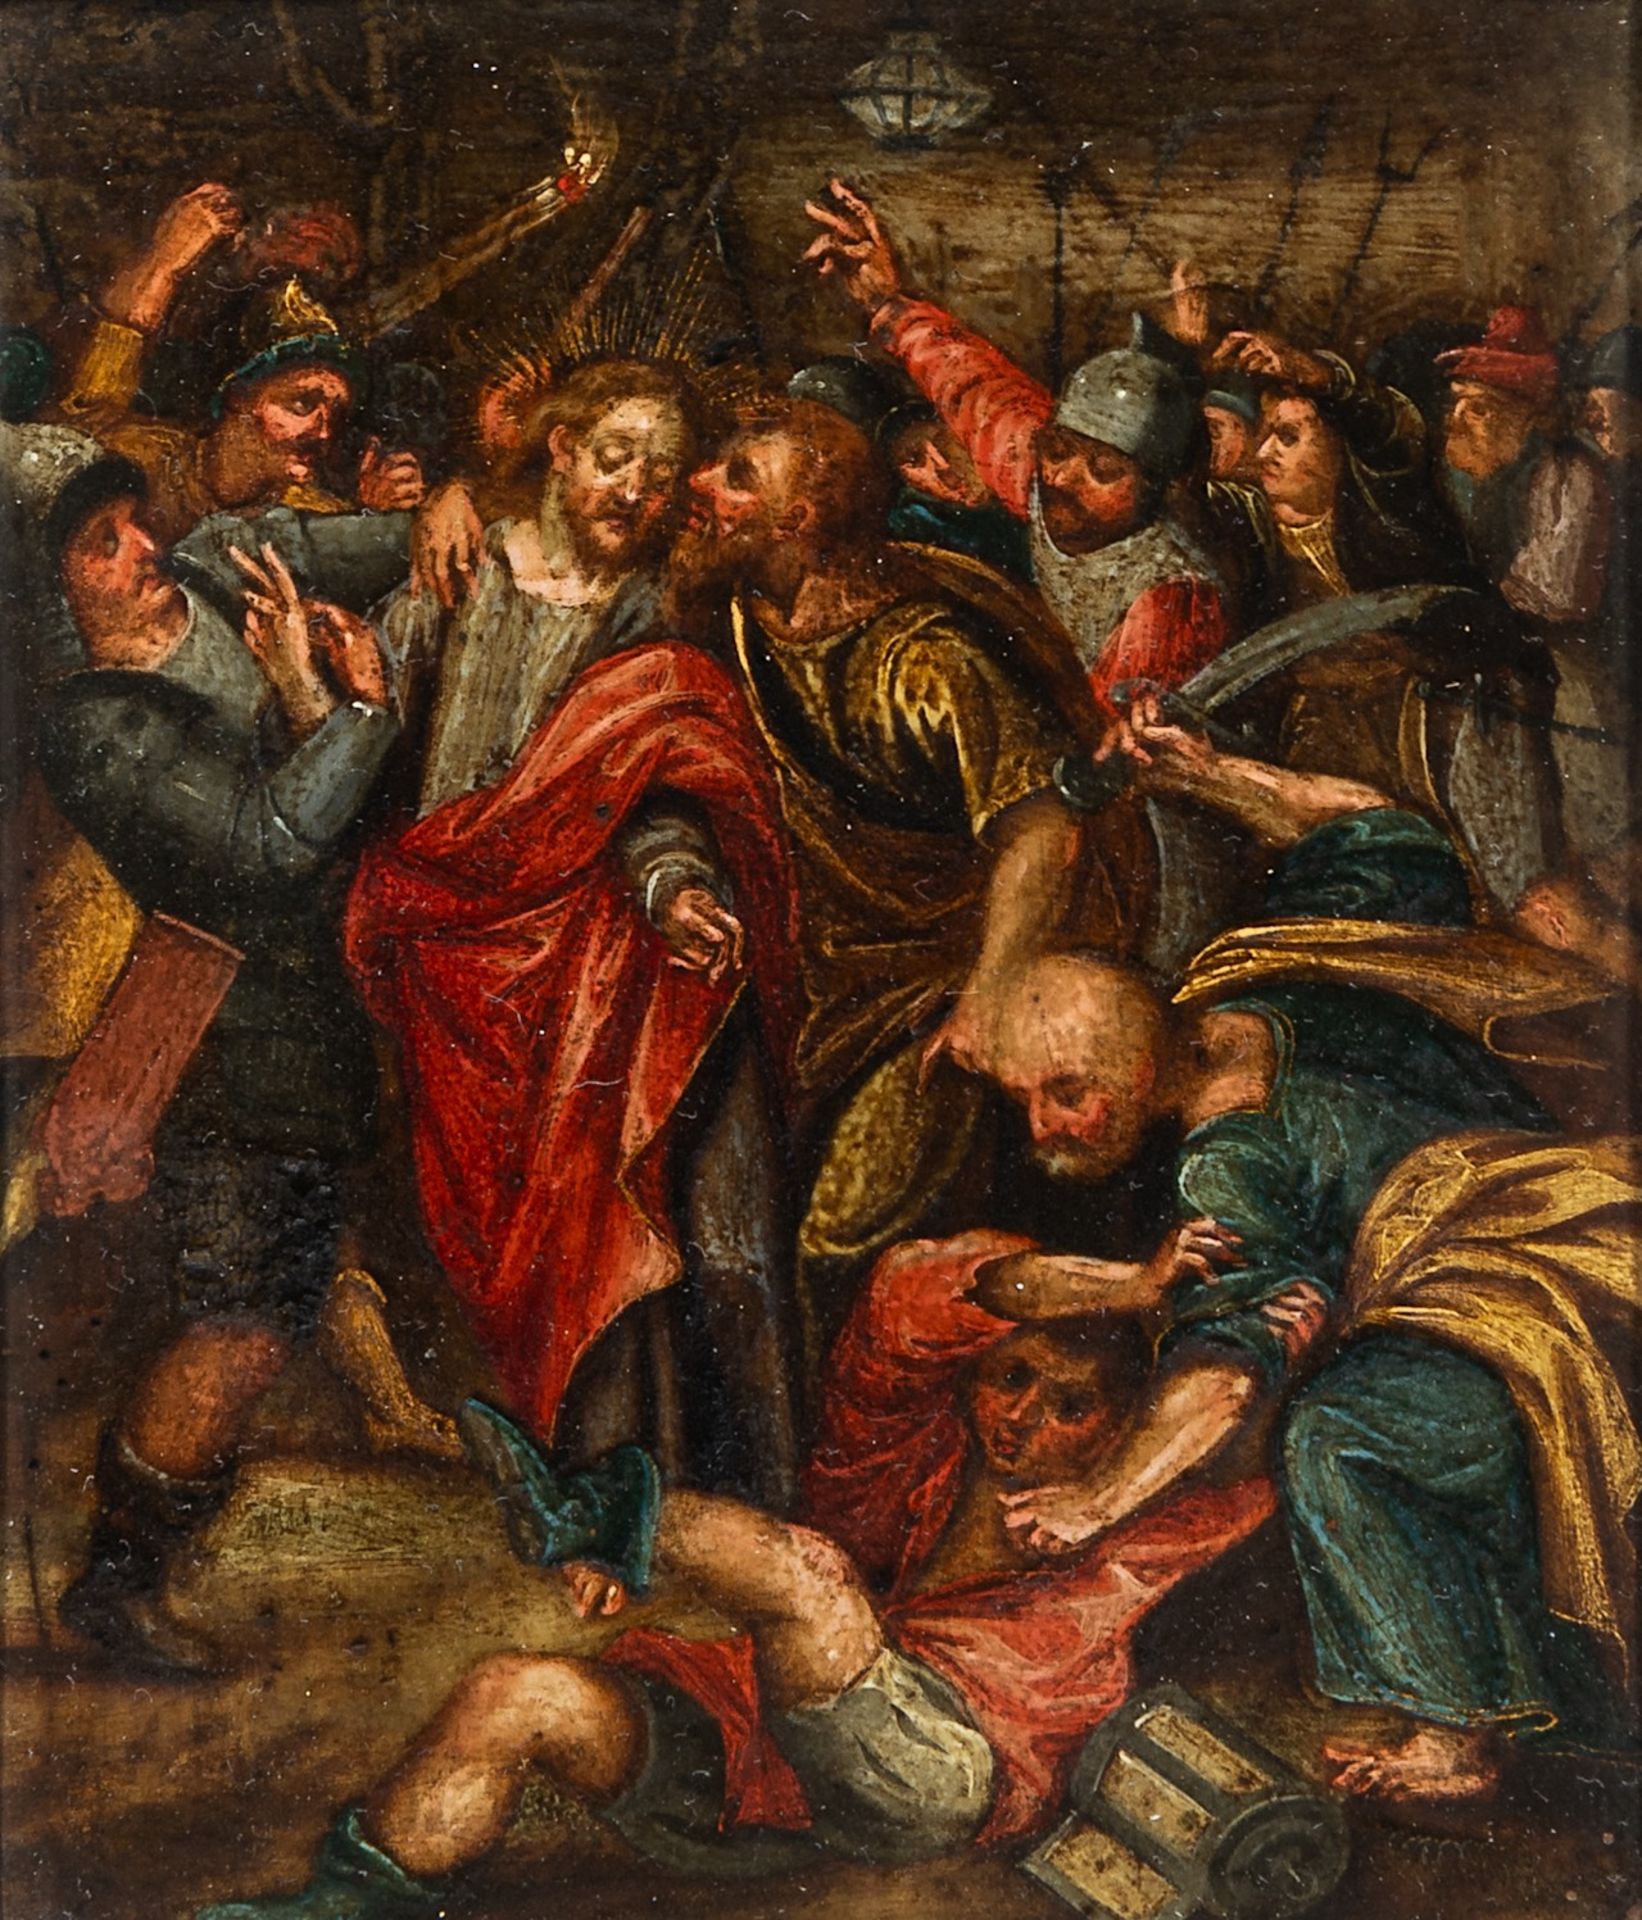 The Arrest of Christ, 17thC, Flemish School, oil on copper 16 x 13 cm. (6.3 x 5.1 in.), Frame: 26 x